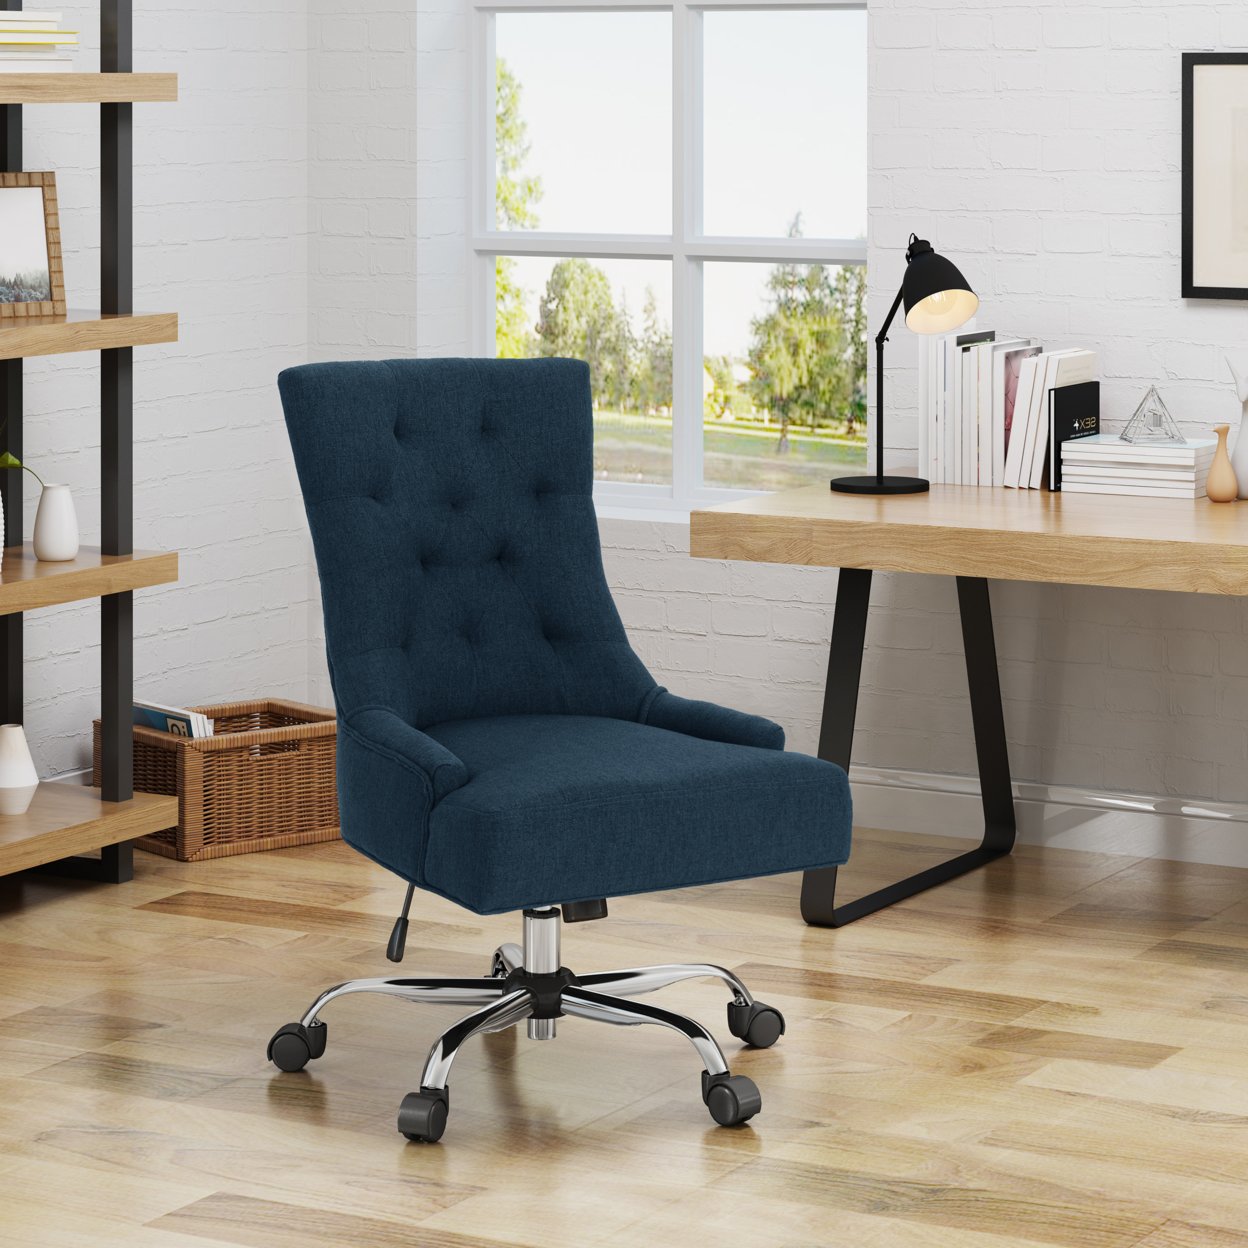 Bagnold Home Office Fabric Desk Chair - Navy Blue